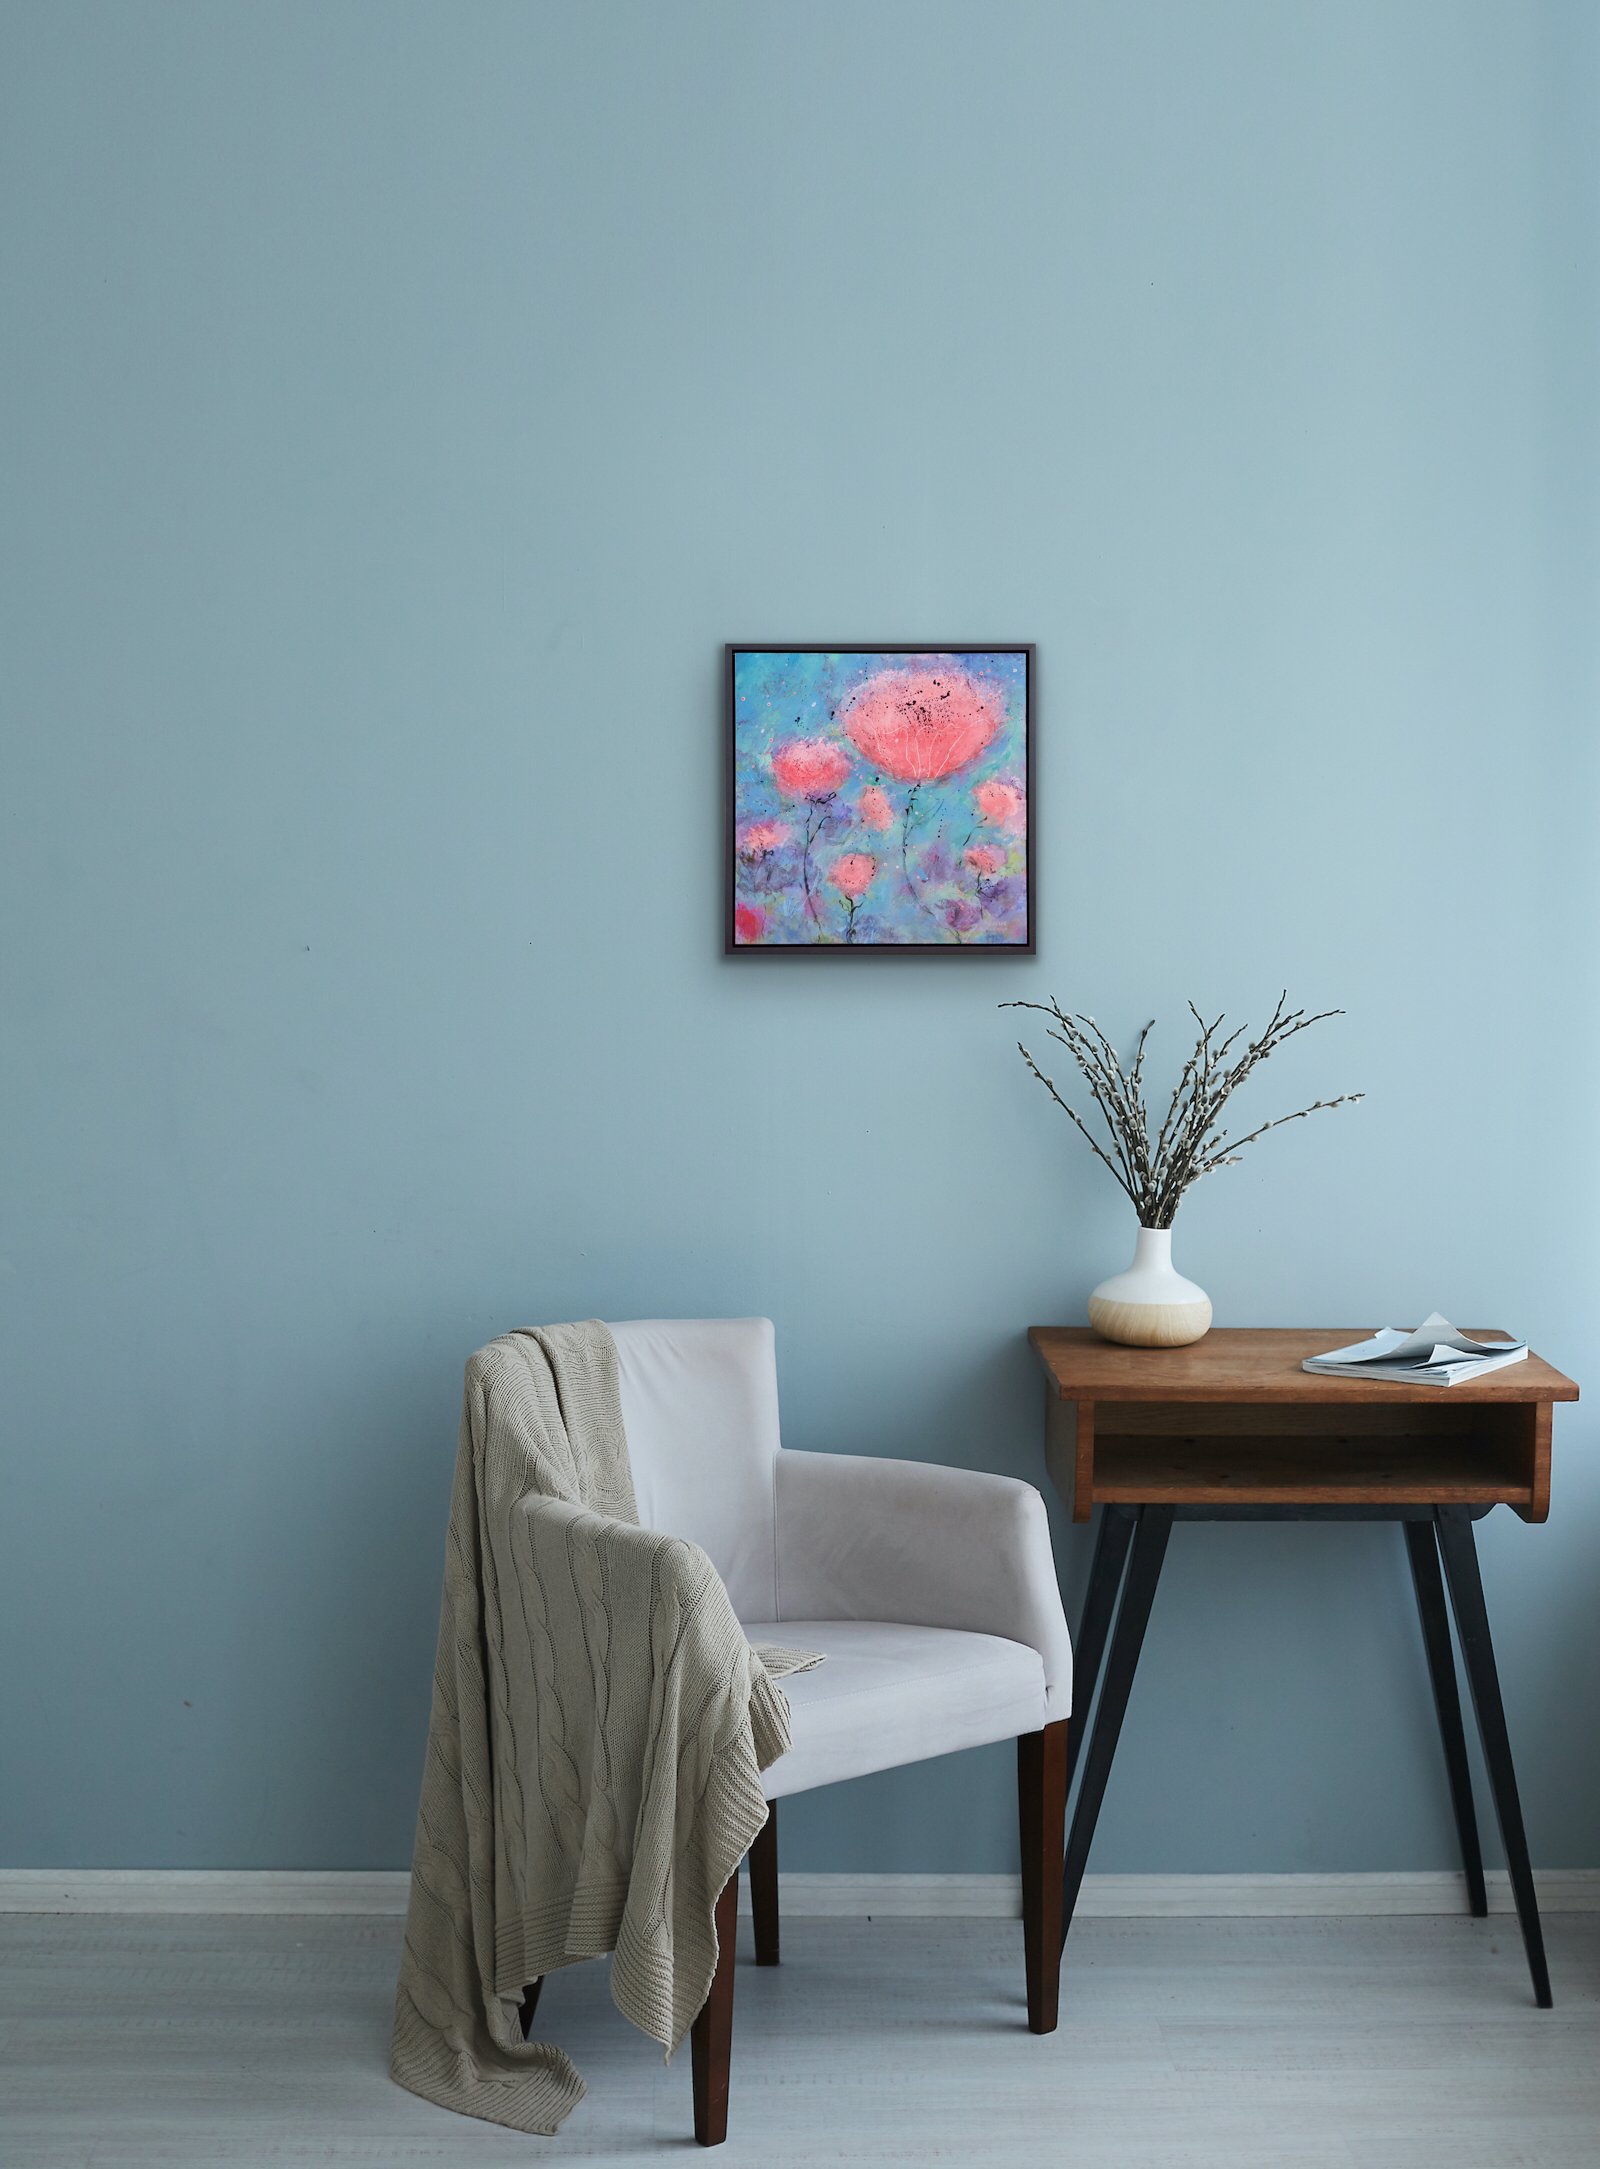 Painting shown by a reading chair and side table on a blue wall